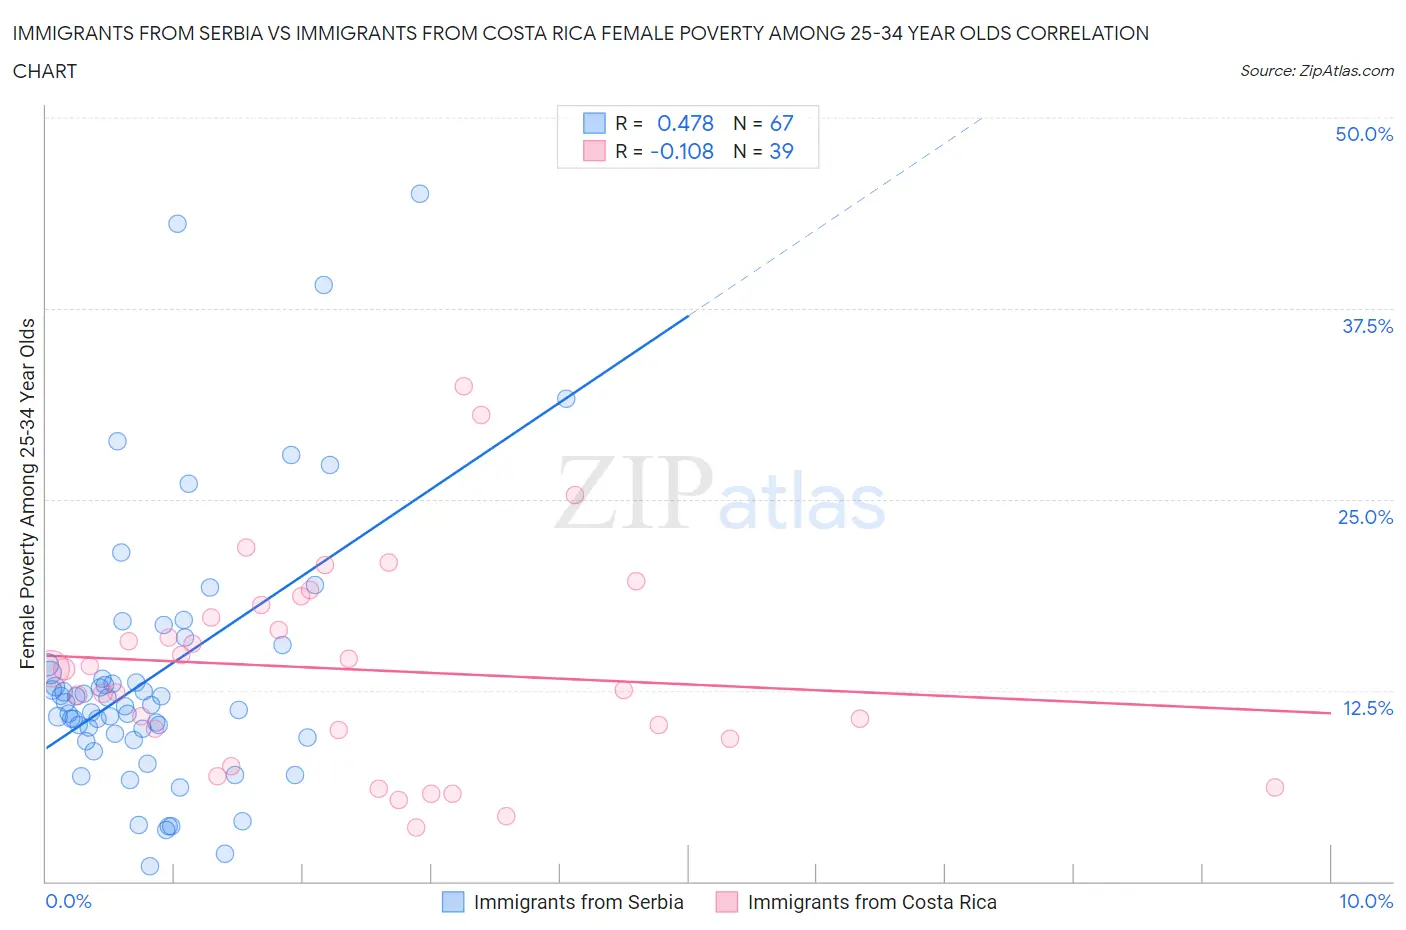 Immigrants from Serbia vs Immigrants from Costa Rica Female Poverty Among 25-34 Year Olds